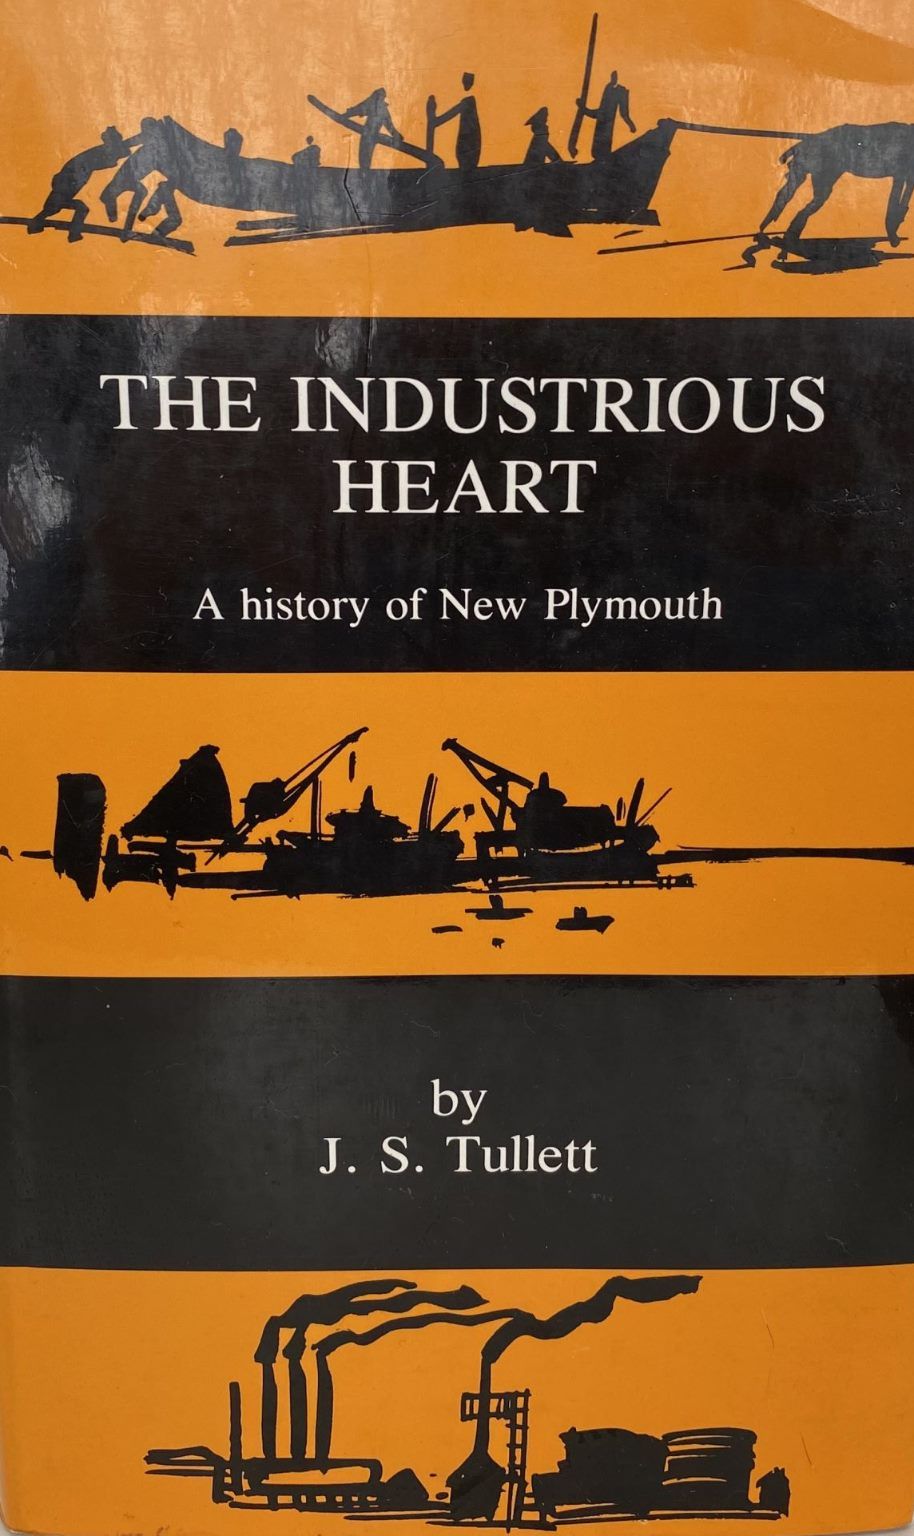 THE INDUSTRIOUS HEART: A History of New Plymouth